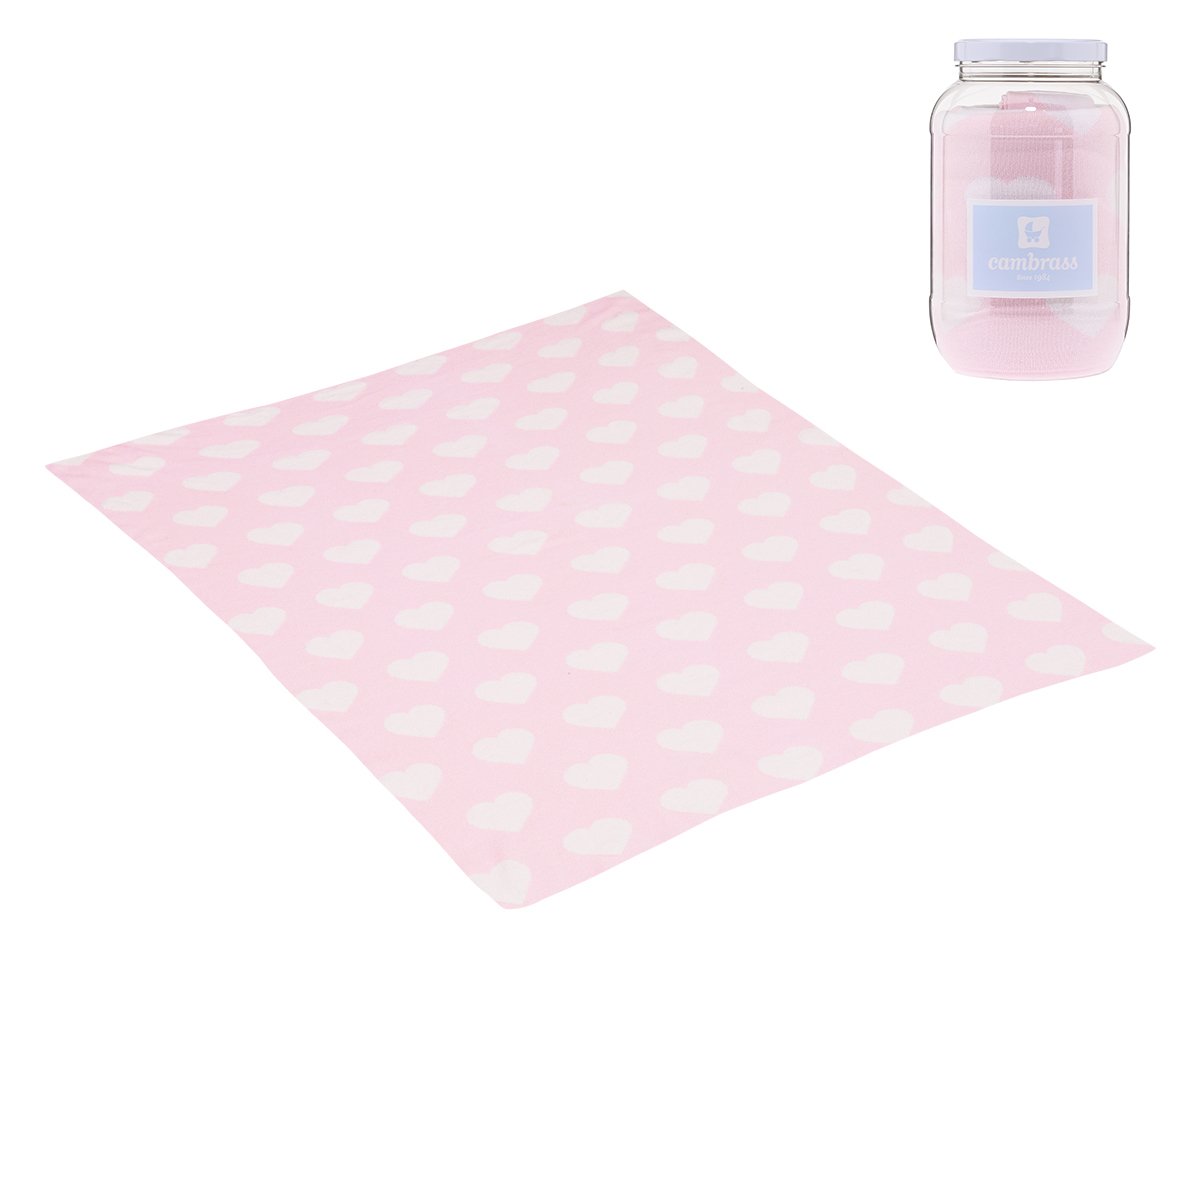 Cambrass Bedspread Cotton, 80 x 100 cm Love pink